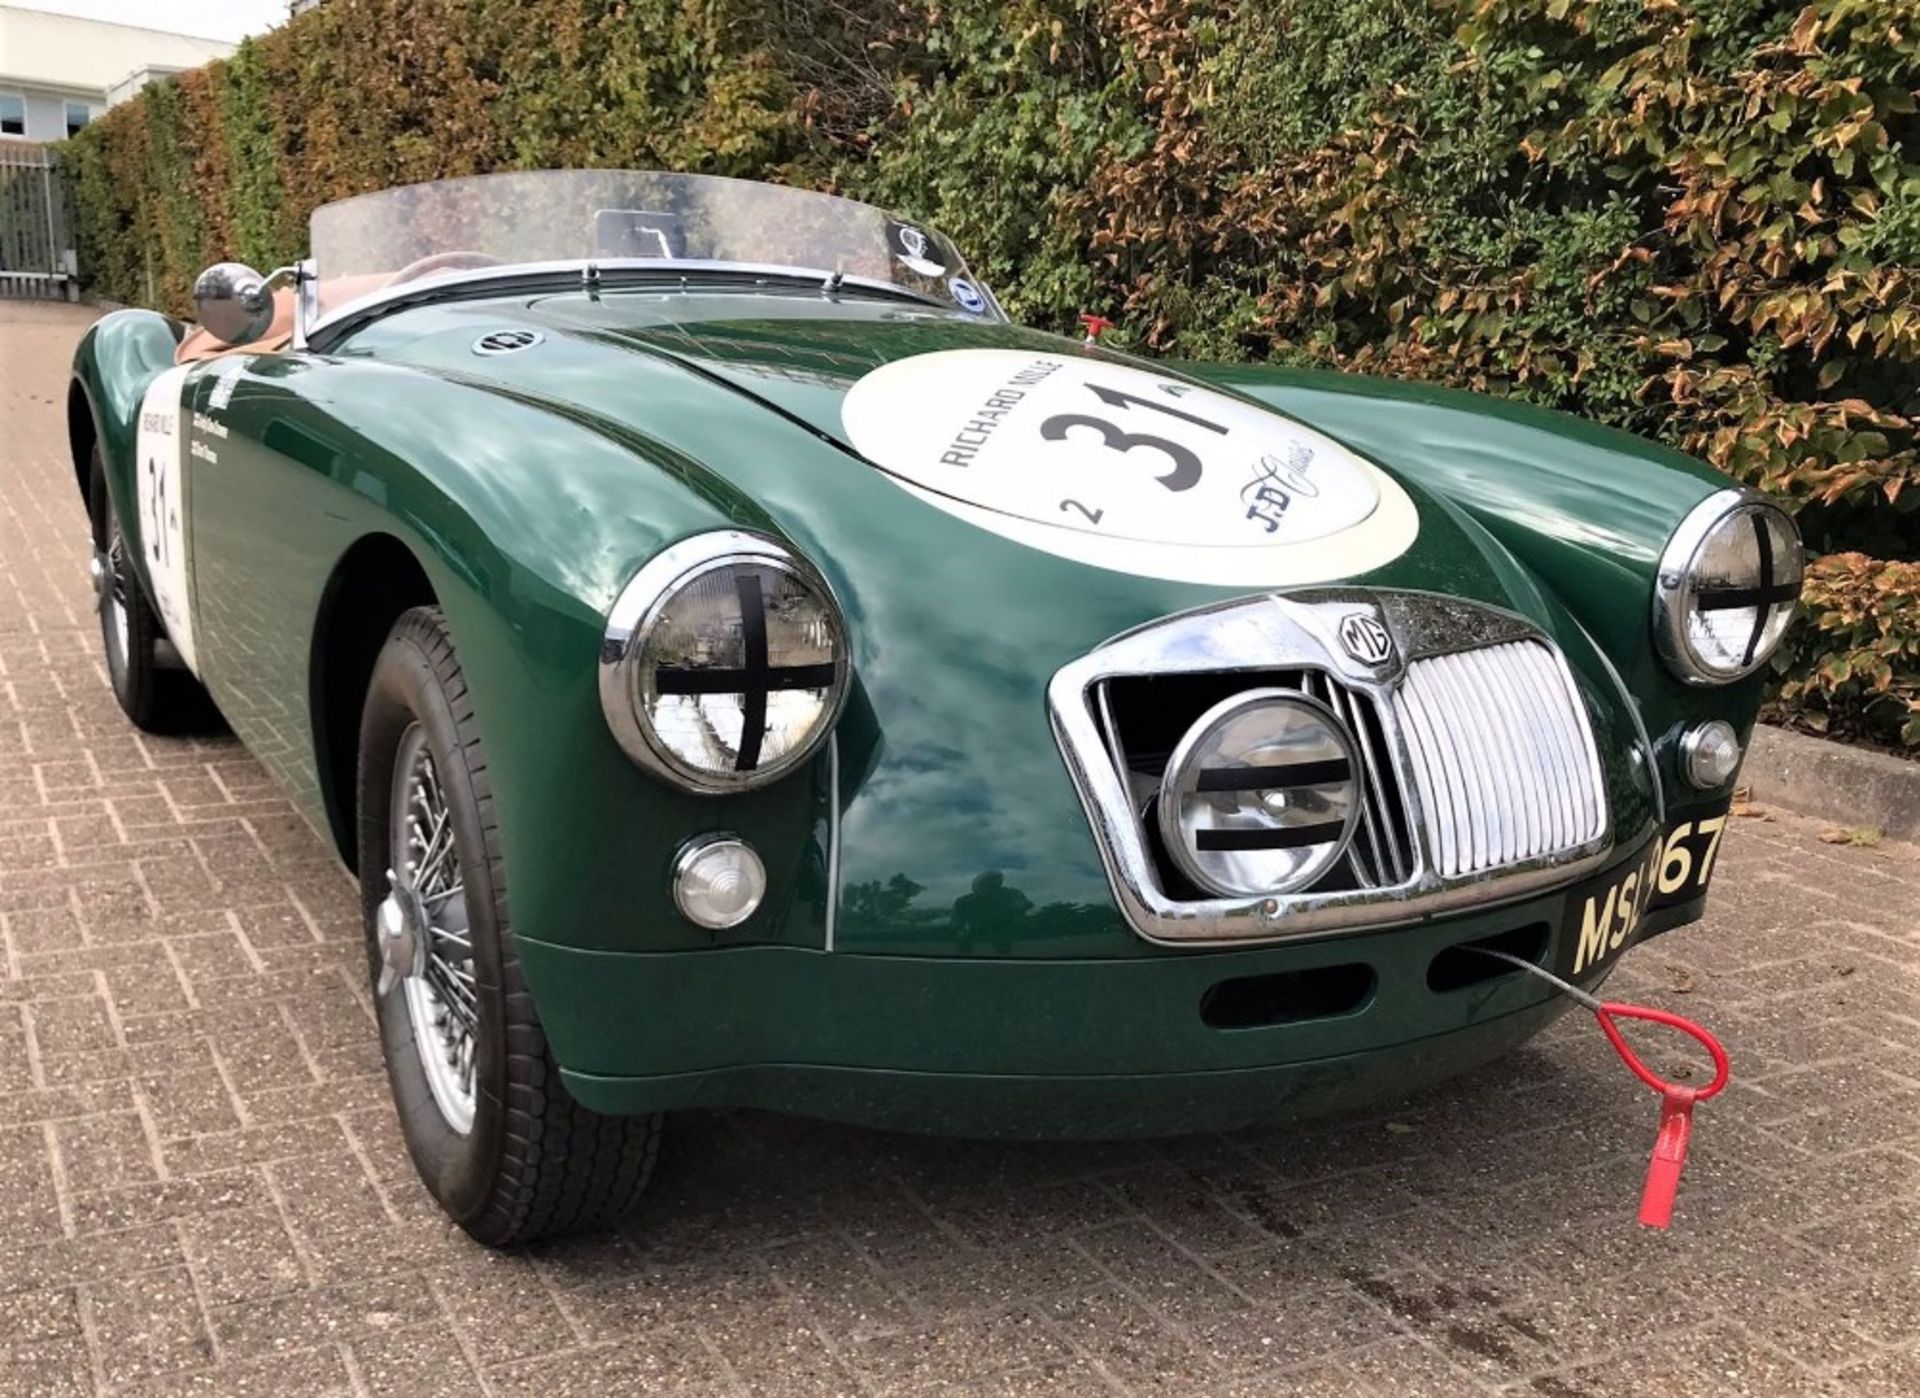 1958 MGA ROADSTER - We regret to inform you that this lot has now been withdrawn. - Image 2 of 2